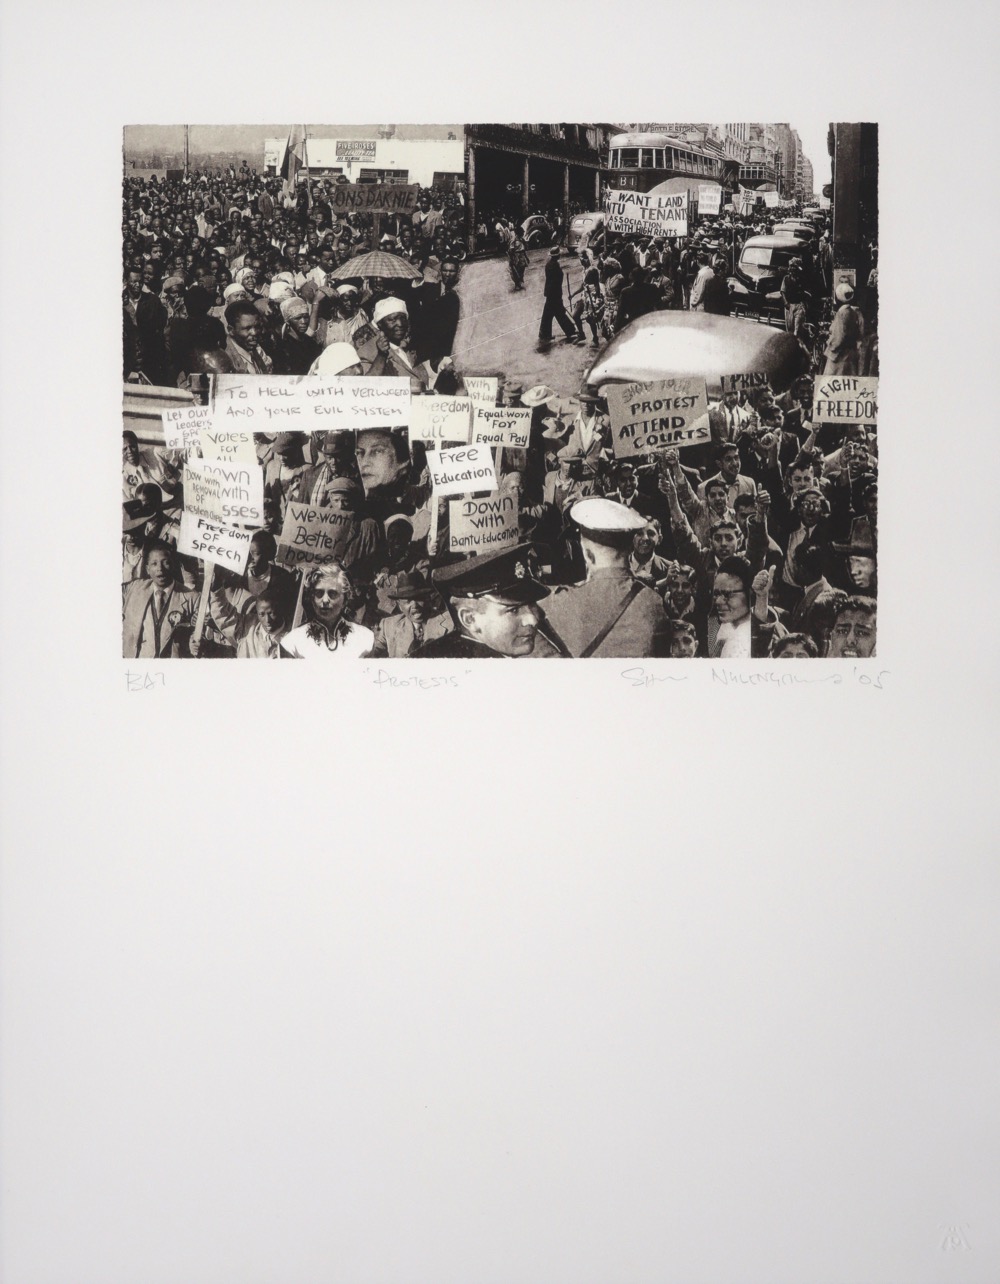 Crowded collage image of anti-Apartheid protestors and South African police